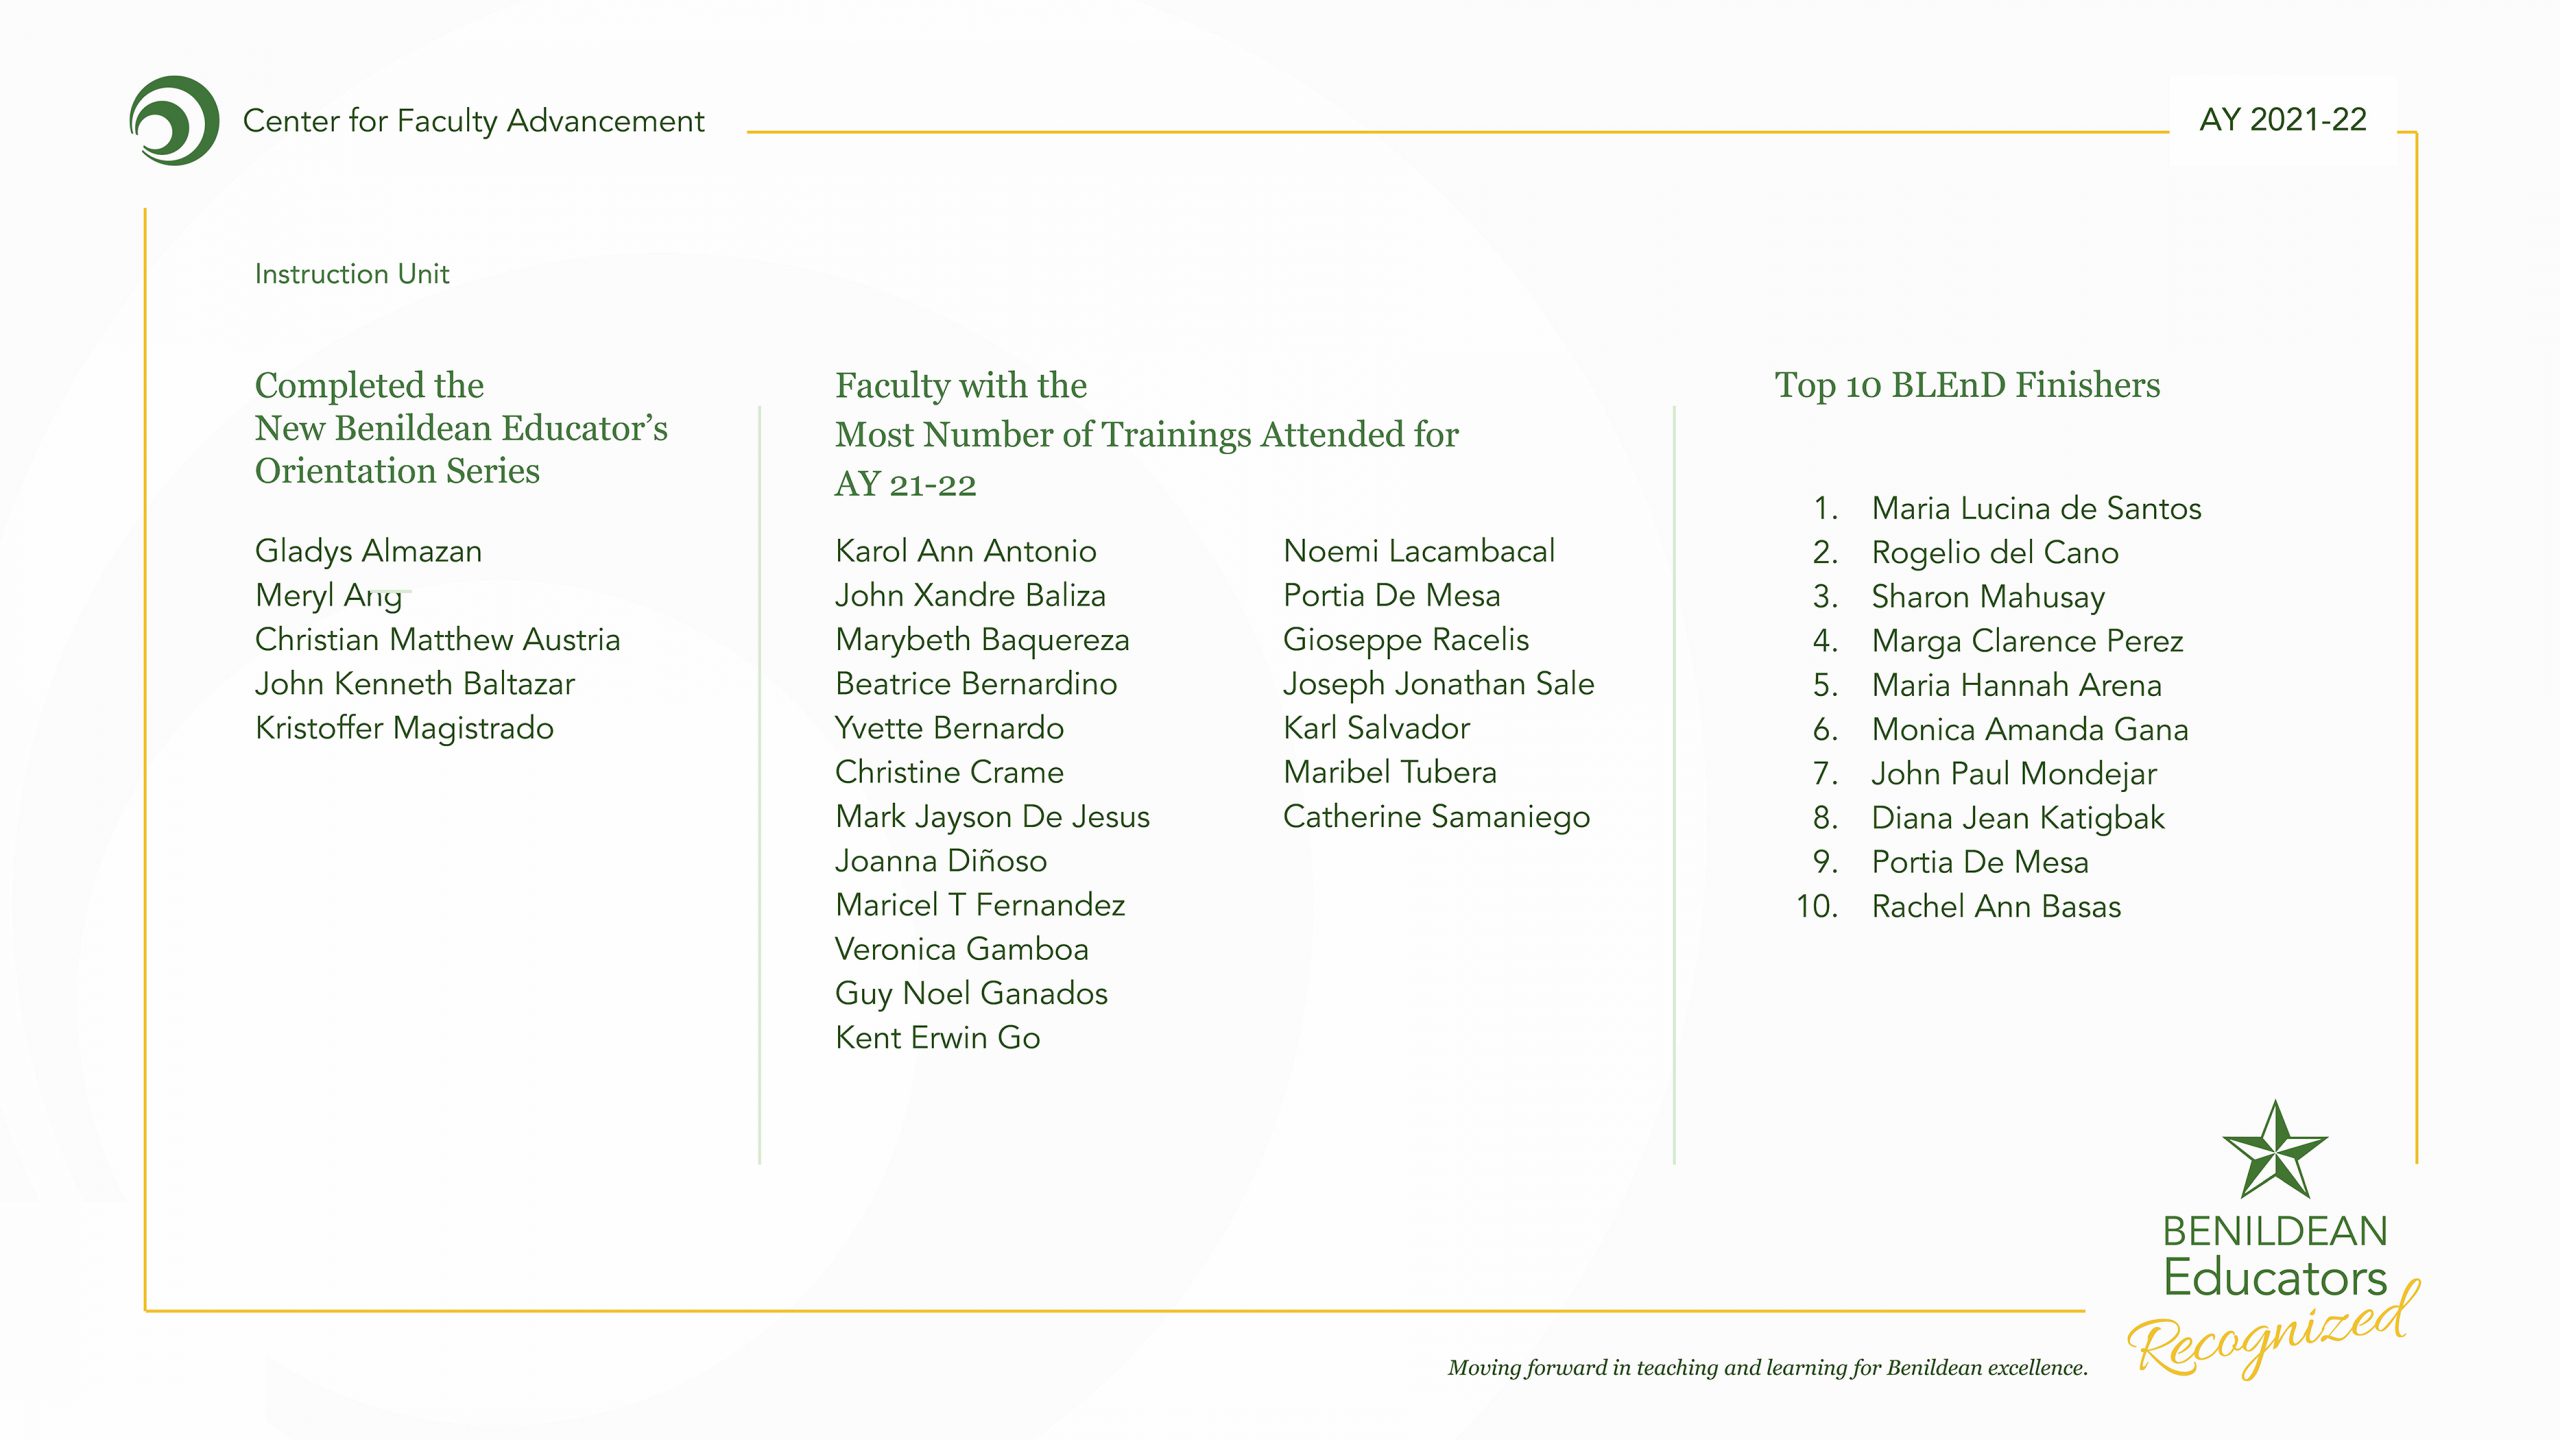 List of Awardees_Page_3